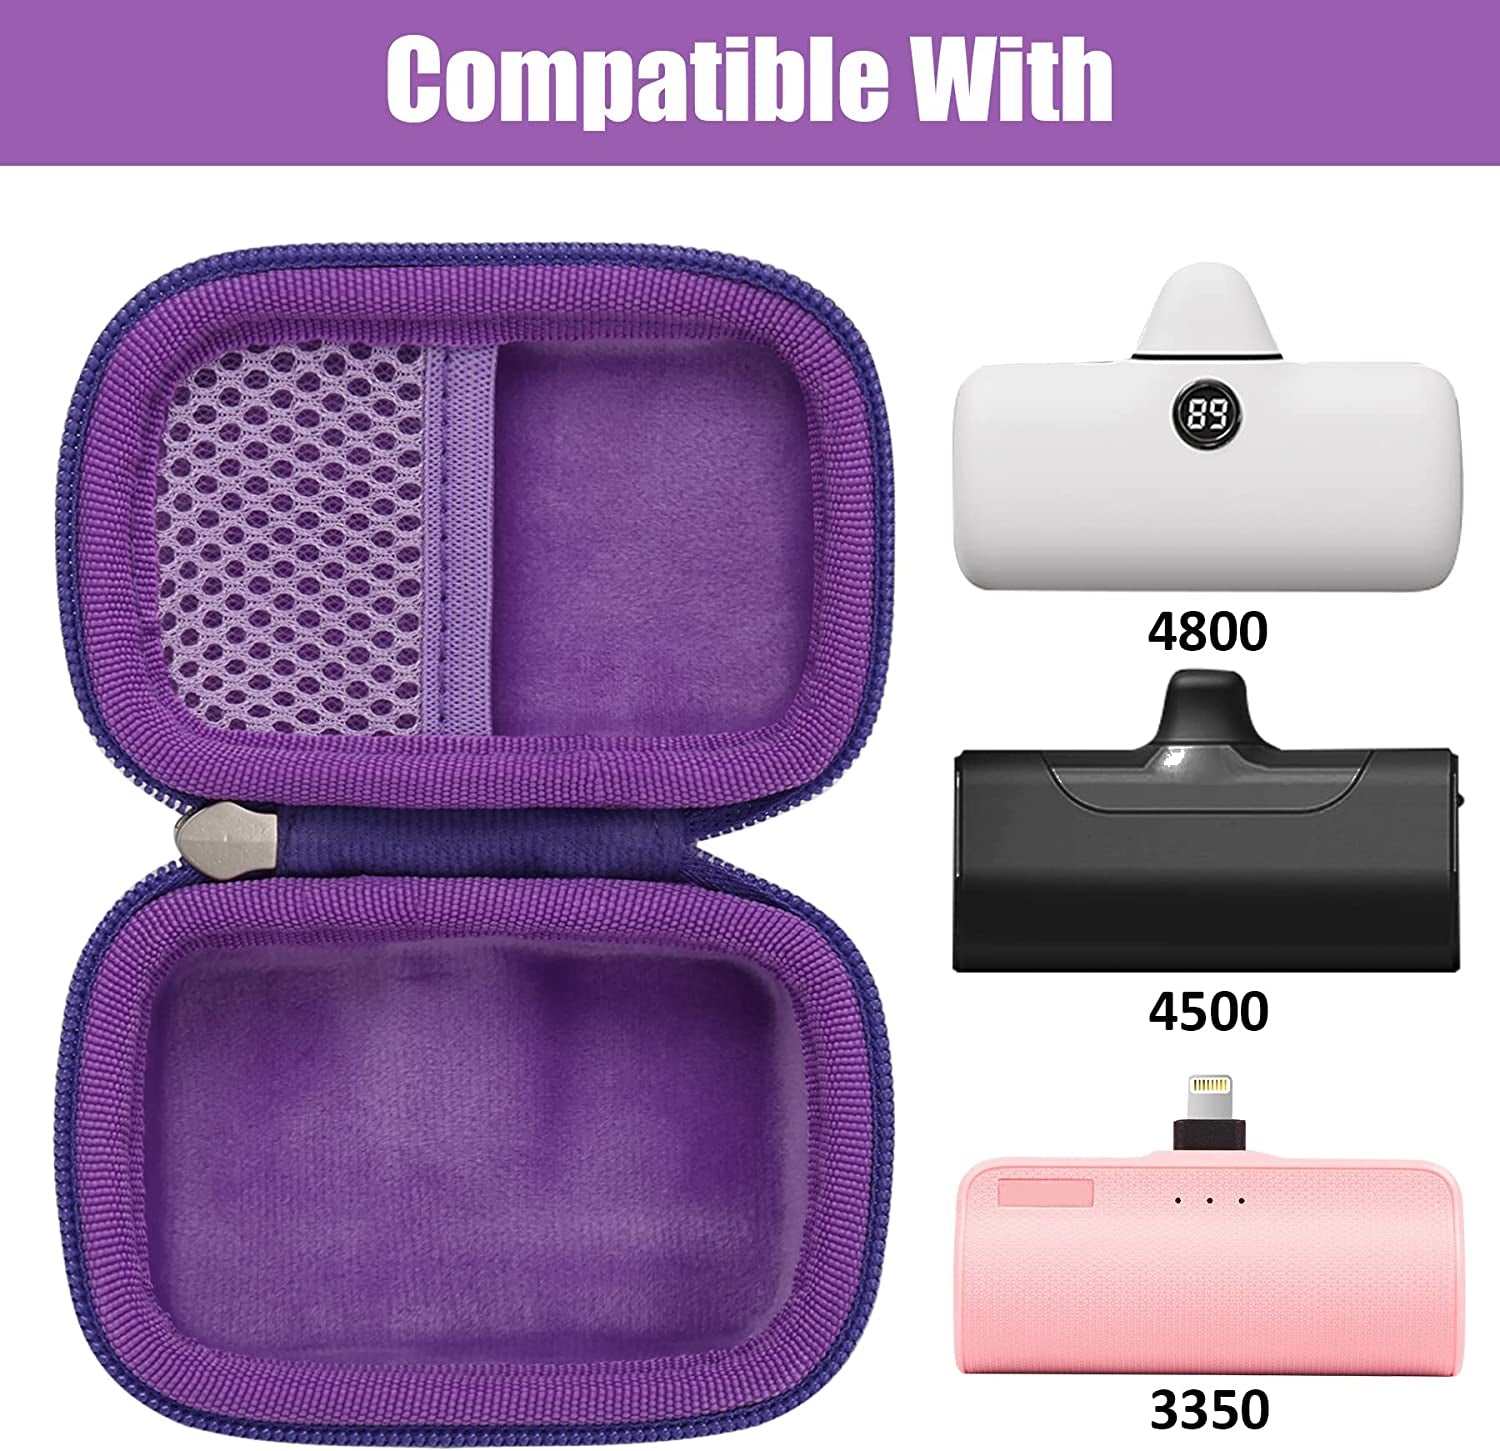 Hard Travel Case Compatible with Iwalk Small Portable Charger 3350Mah 4500Mah 4800Mah Ultra-Compact Power Bank, Case Only (Purple)